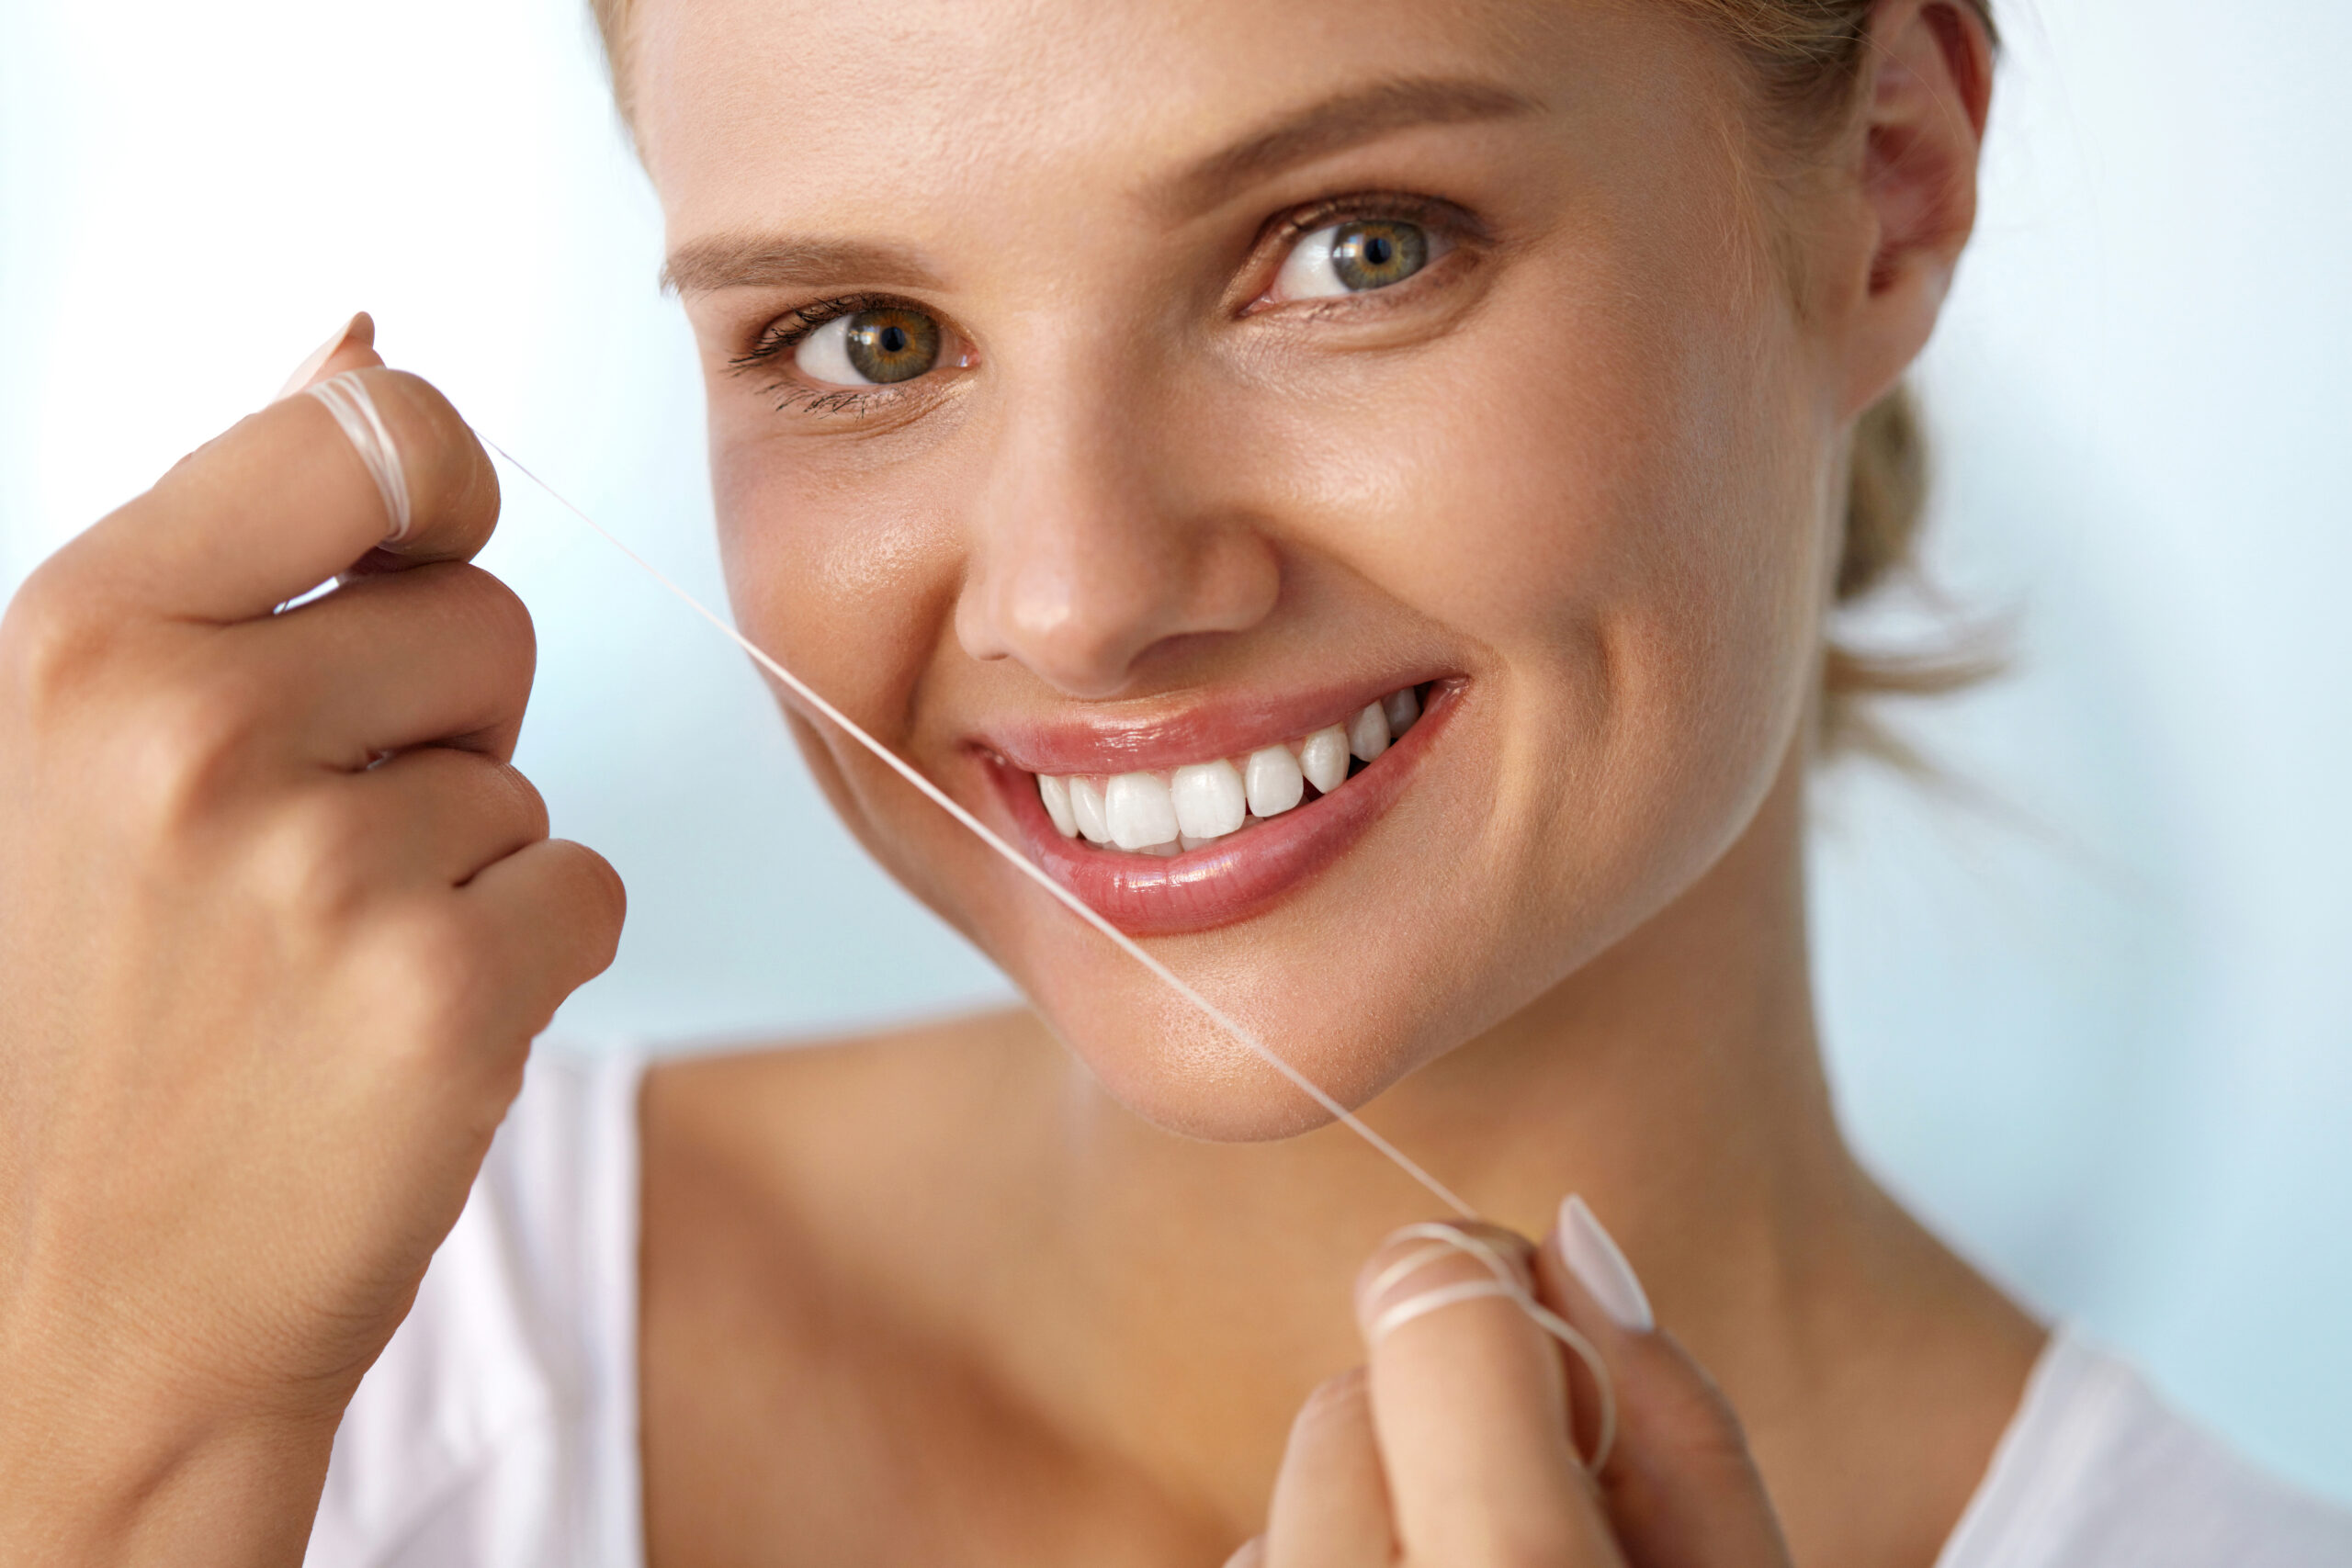 Dental Health. Closeup Portrait Of Beautiful Happy Smiling Young Woman With Perfect Smile Cleaning Healthy White Teeth, Flossing Using Floss. Tooth Care, Oral Hygiene Concept. High Resolution Image